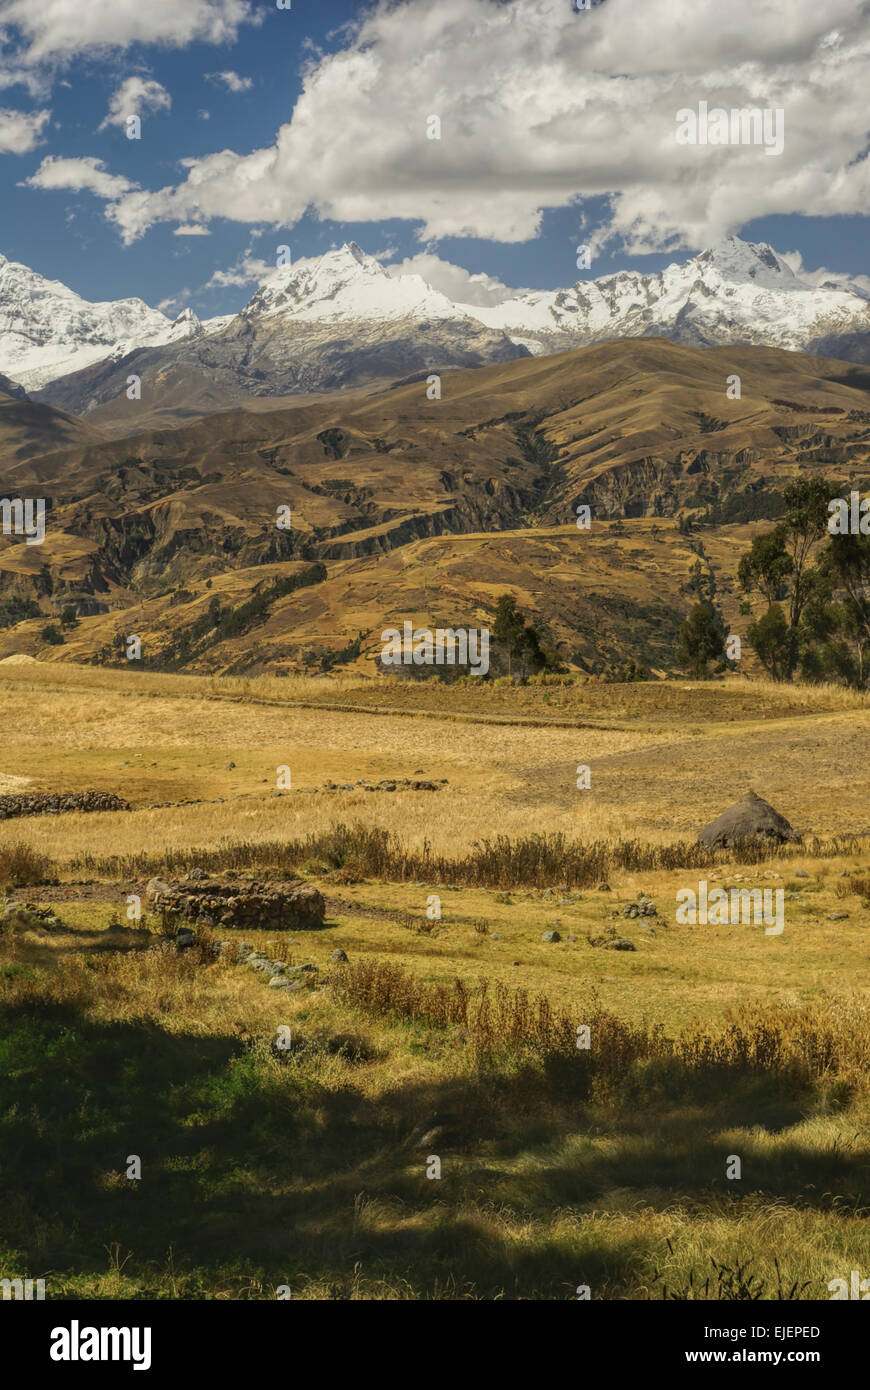 Picturesque view of a sunlit slopes of Peruvian Cordillera Negra Stock Photo